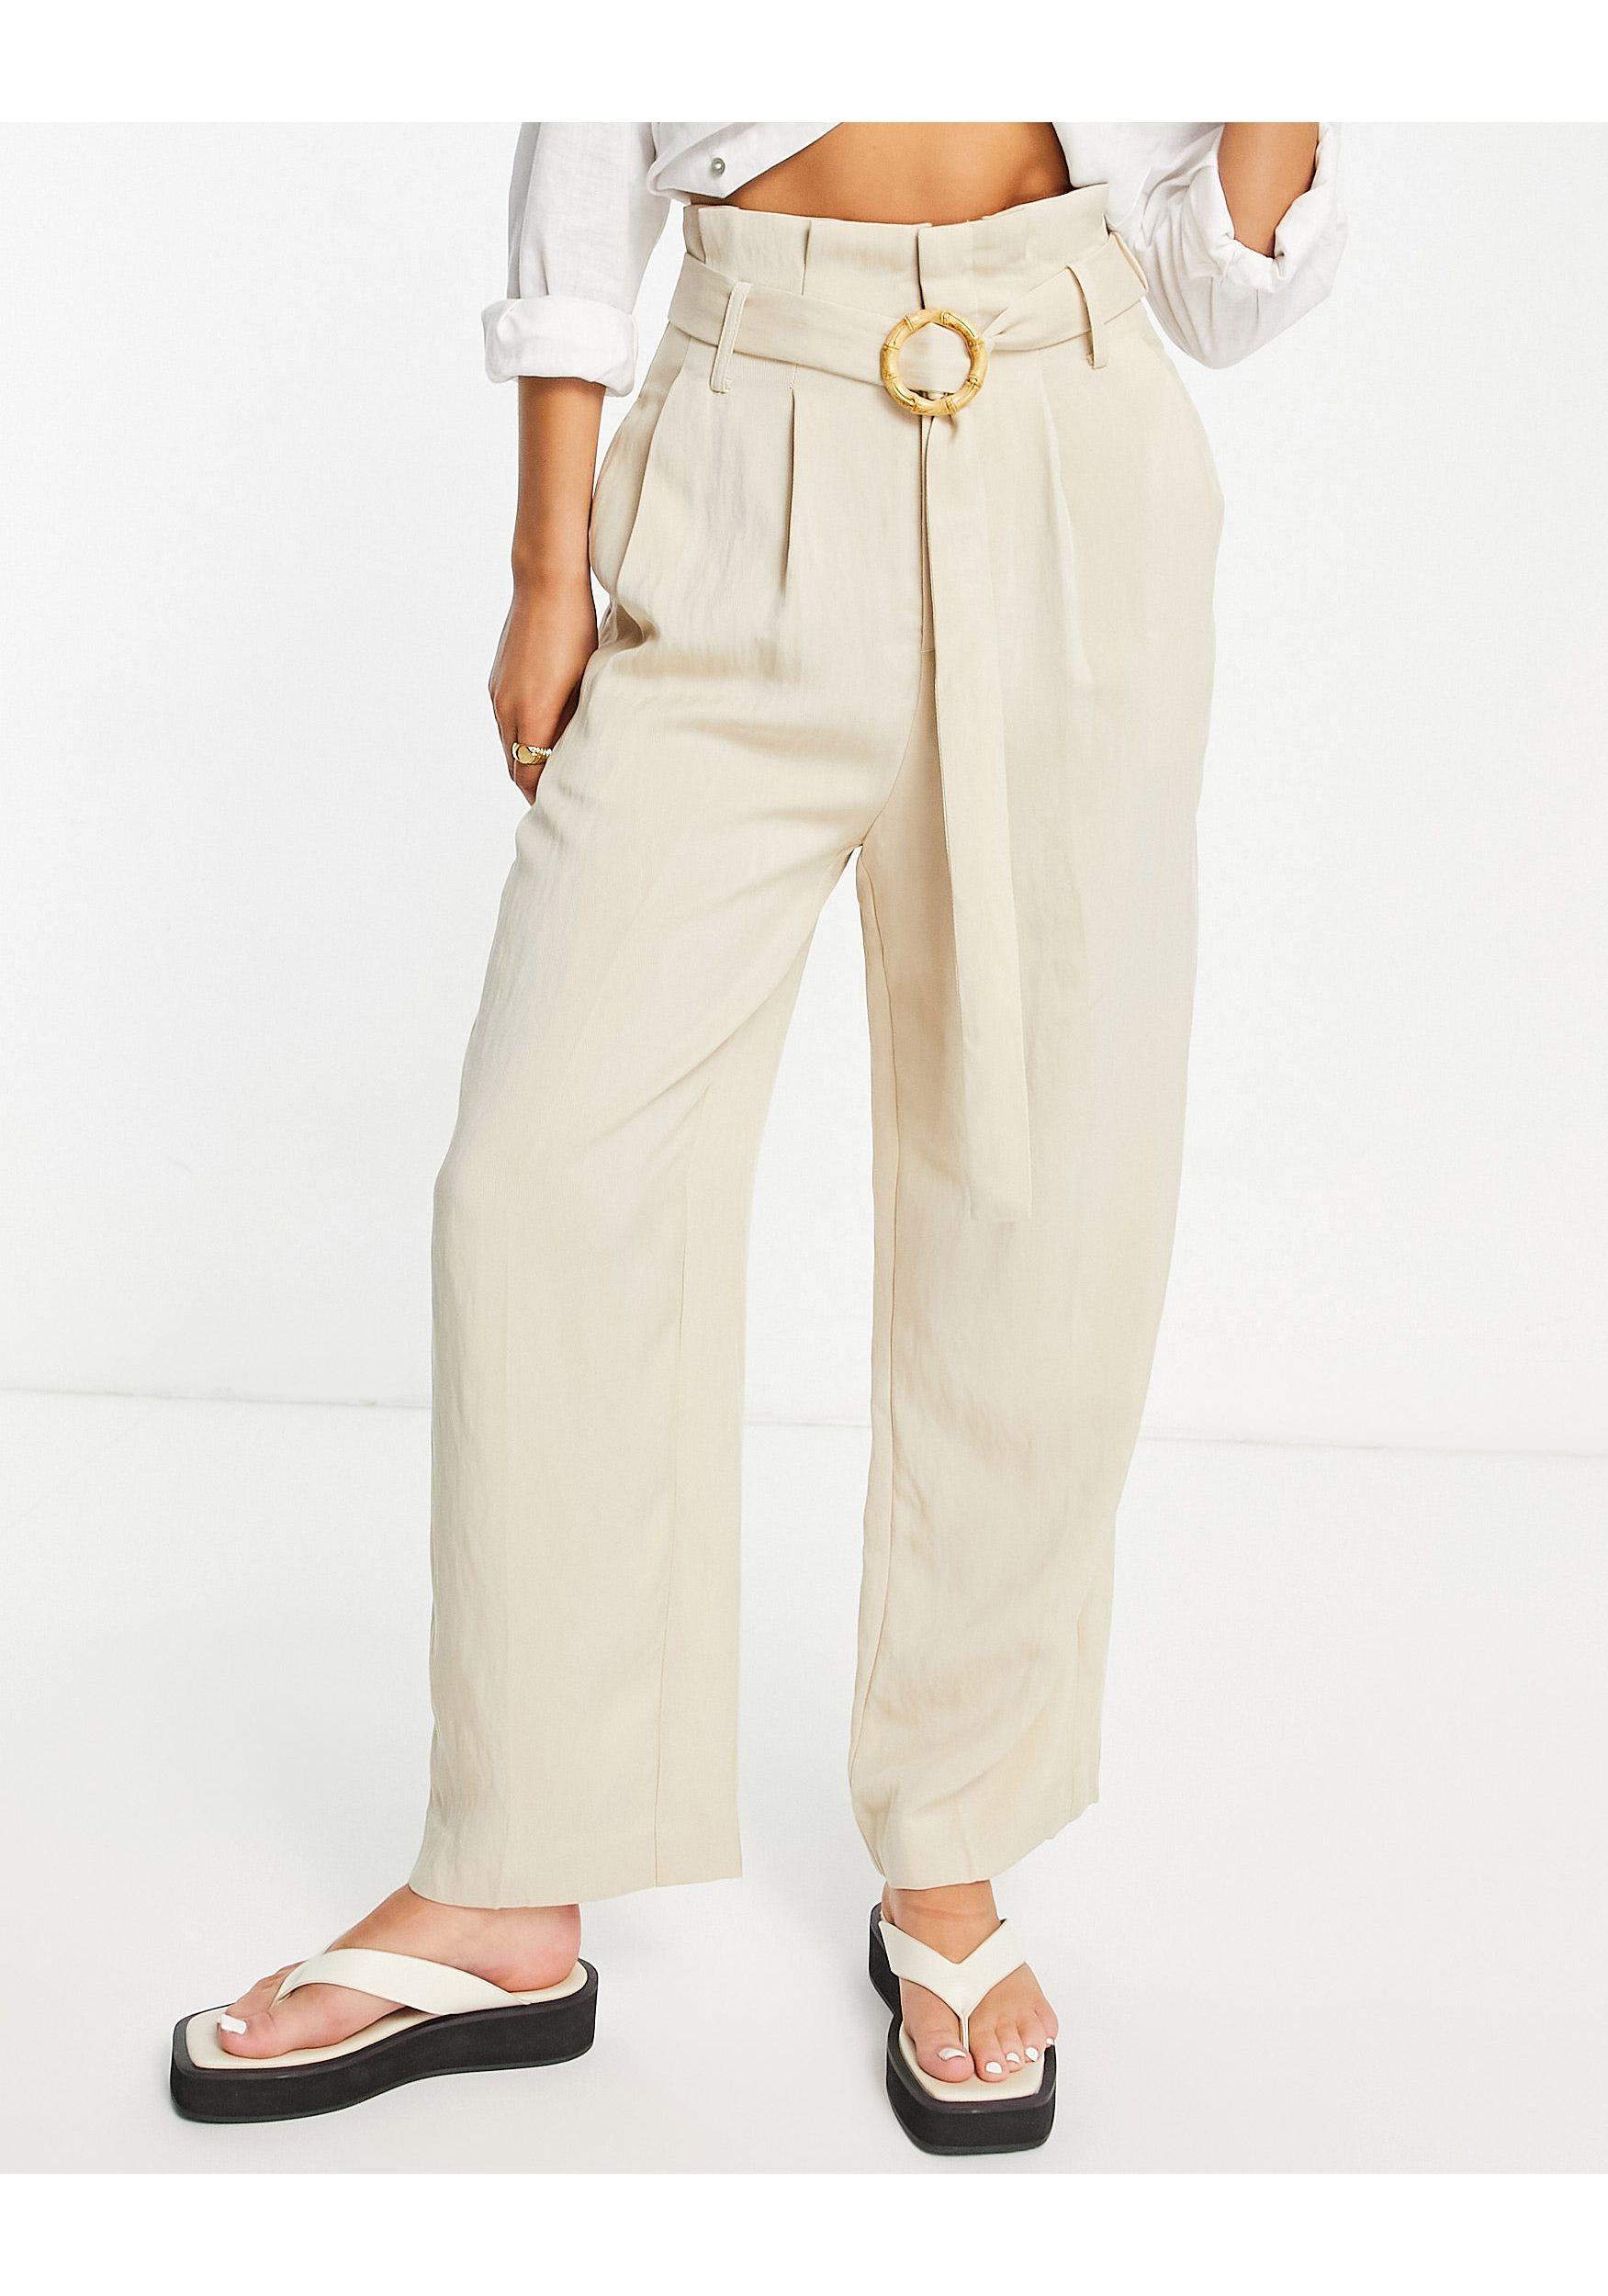 Urban Revivo High Waisted Linen Trousers With Belt in Natural | Lyst